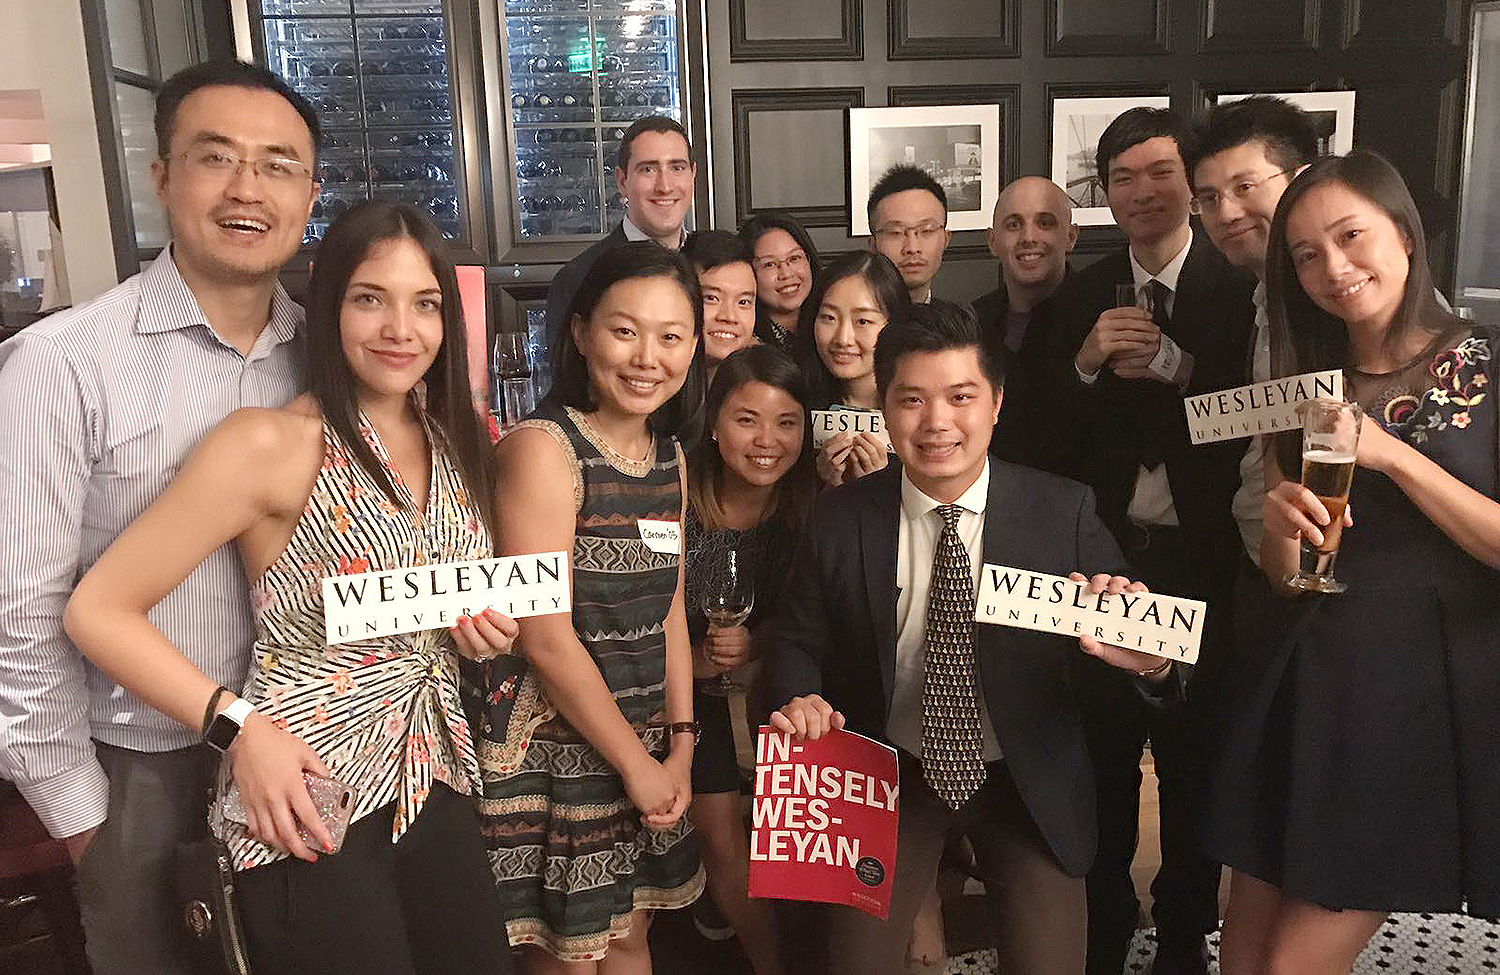 The Hong Kong Summer Sendoff was hosted by Will McLane ’92, and organized by Carmen Cheung ’05 on July 7. 